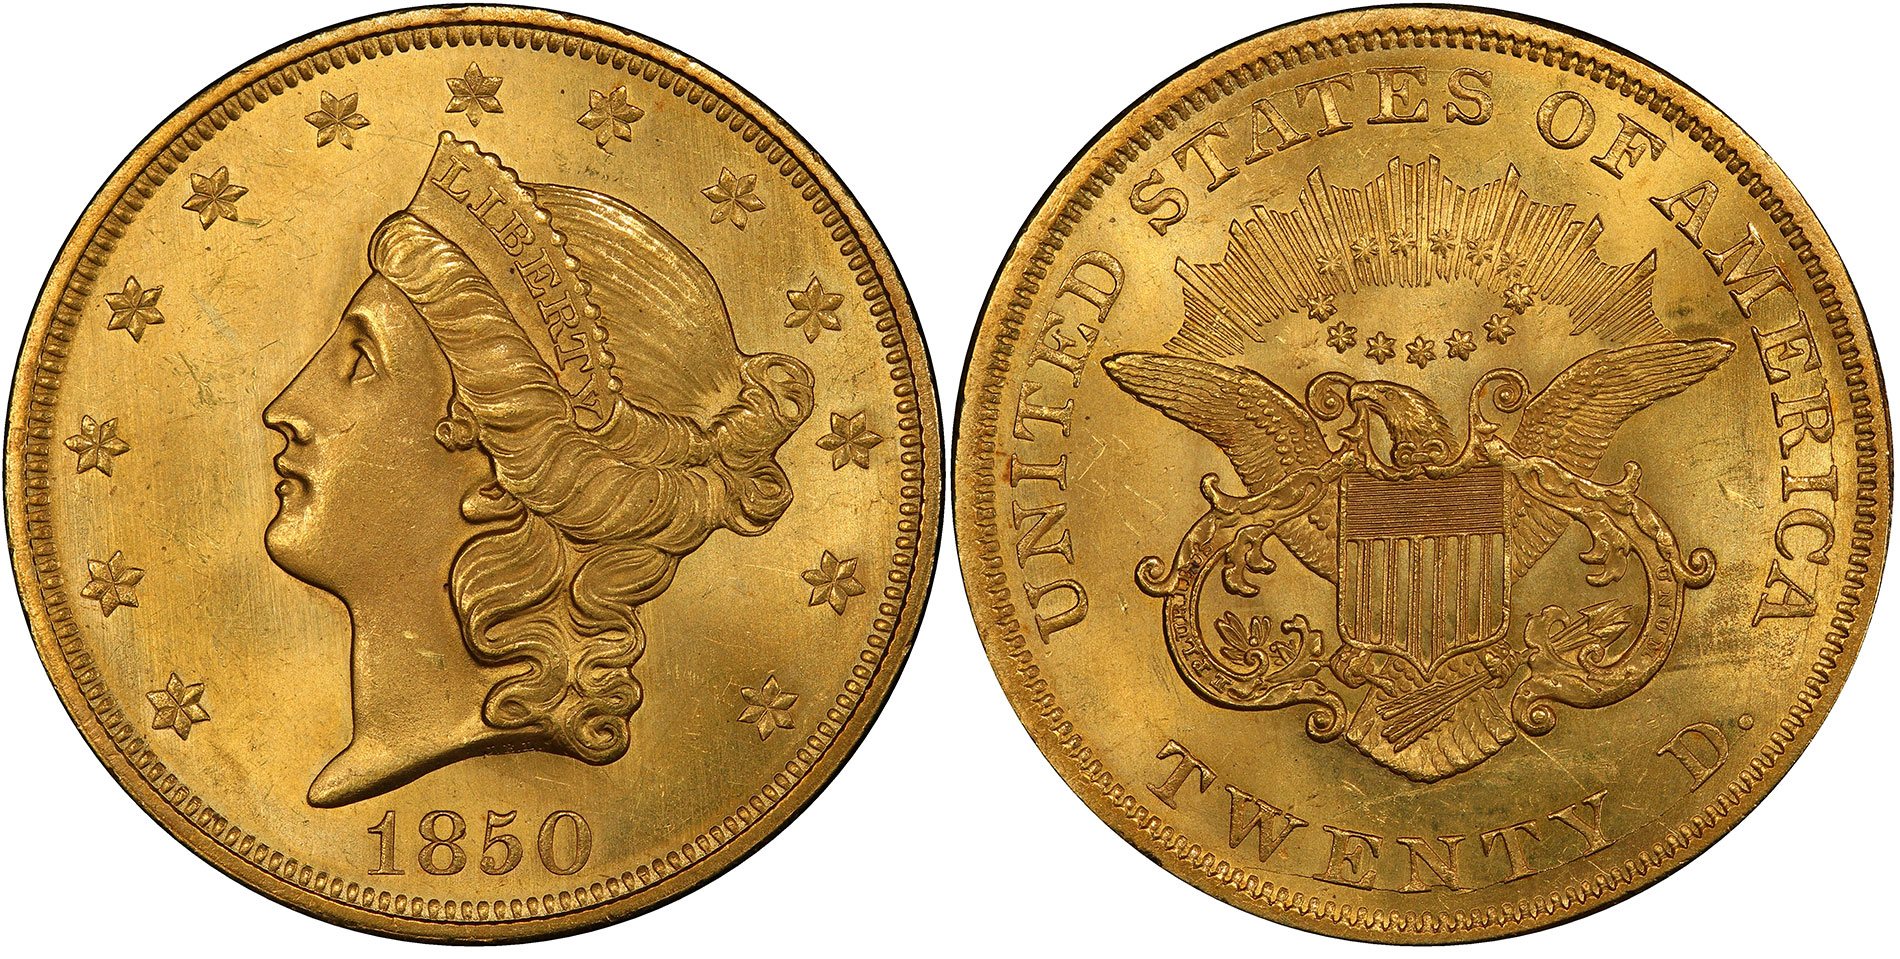 The First US Gold Coin, the 1787 Brasher Doubloon, Could Sell for $15M